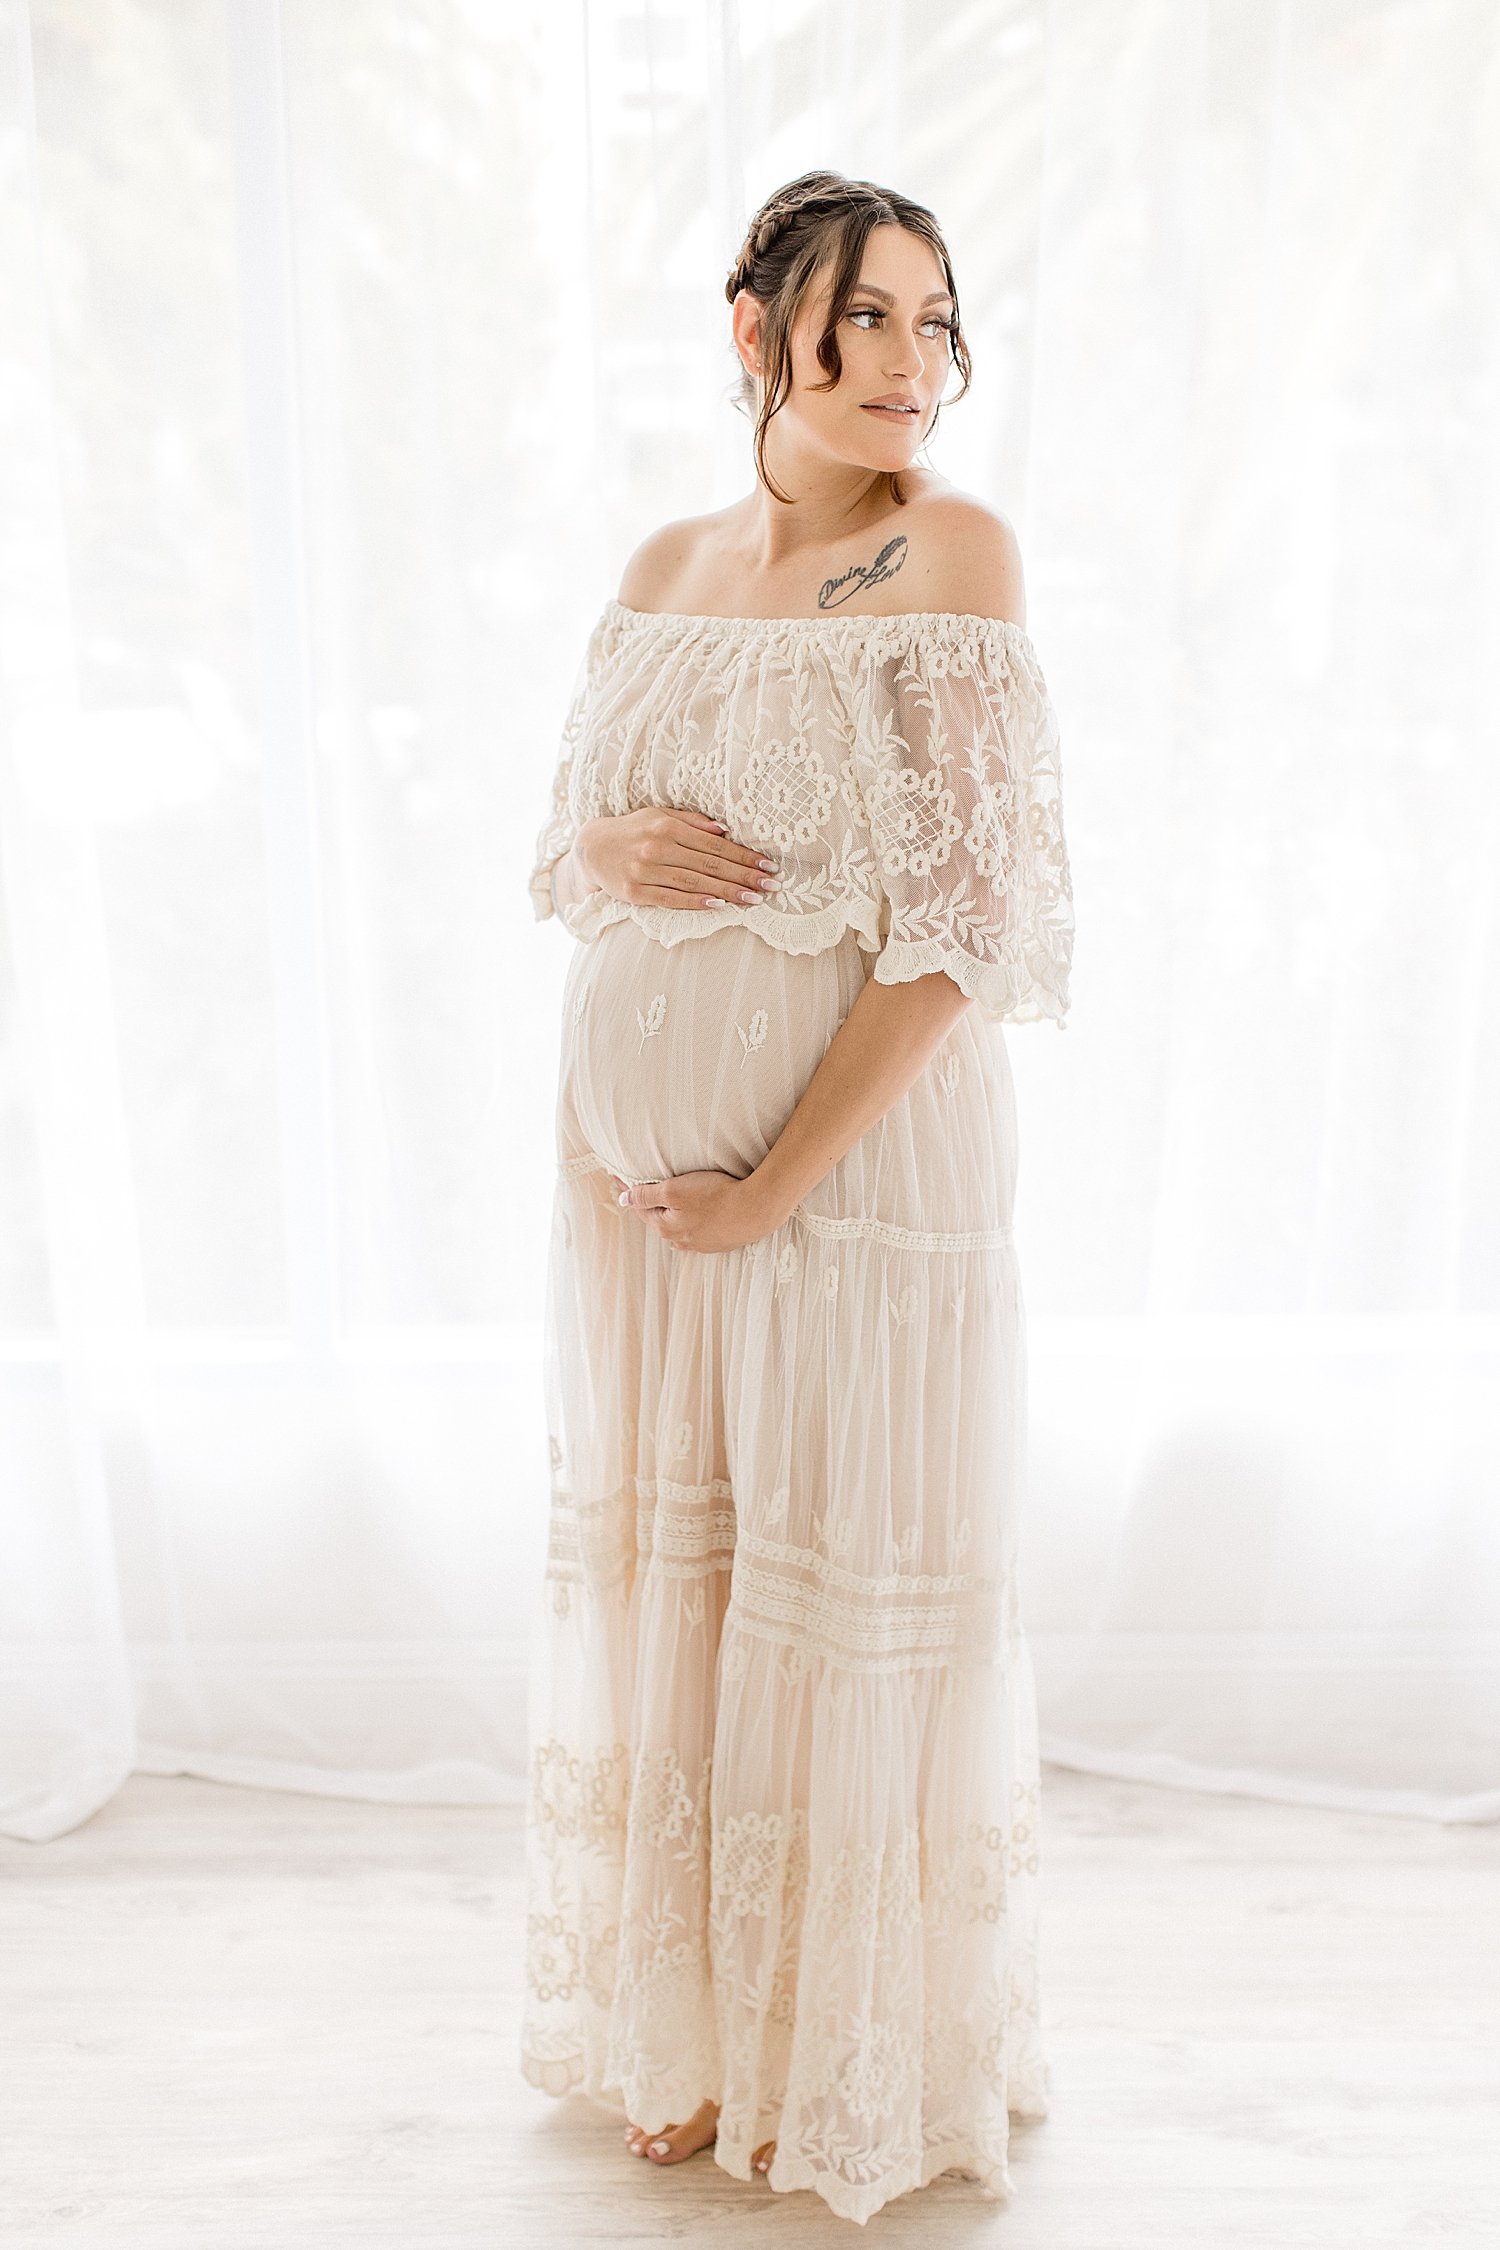 Light and airy maternity session with expectant mother in Newport Beach with photographer Ambre Williams